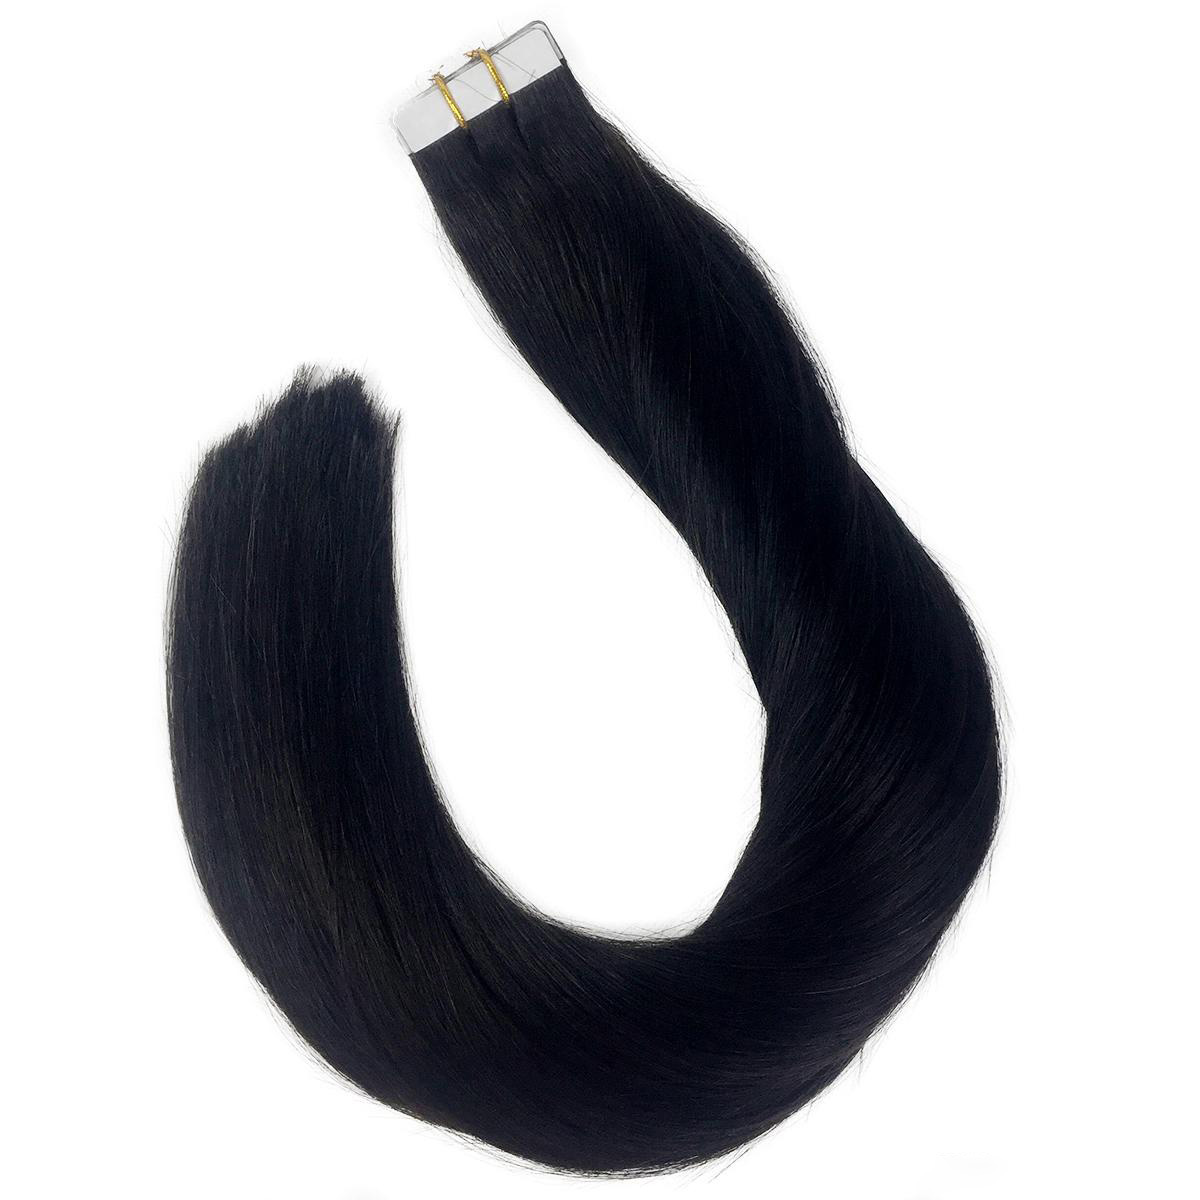 Tape Human Hair Extensions Wholesale - Weft Platinum Blonde Remy Hair Tape Human Hair Extensions Wholesale - Weft Platinum Blonde Remy Hair